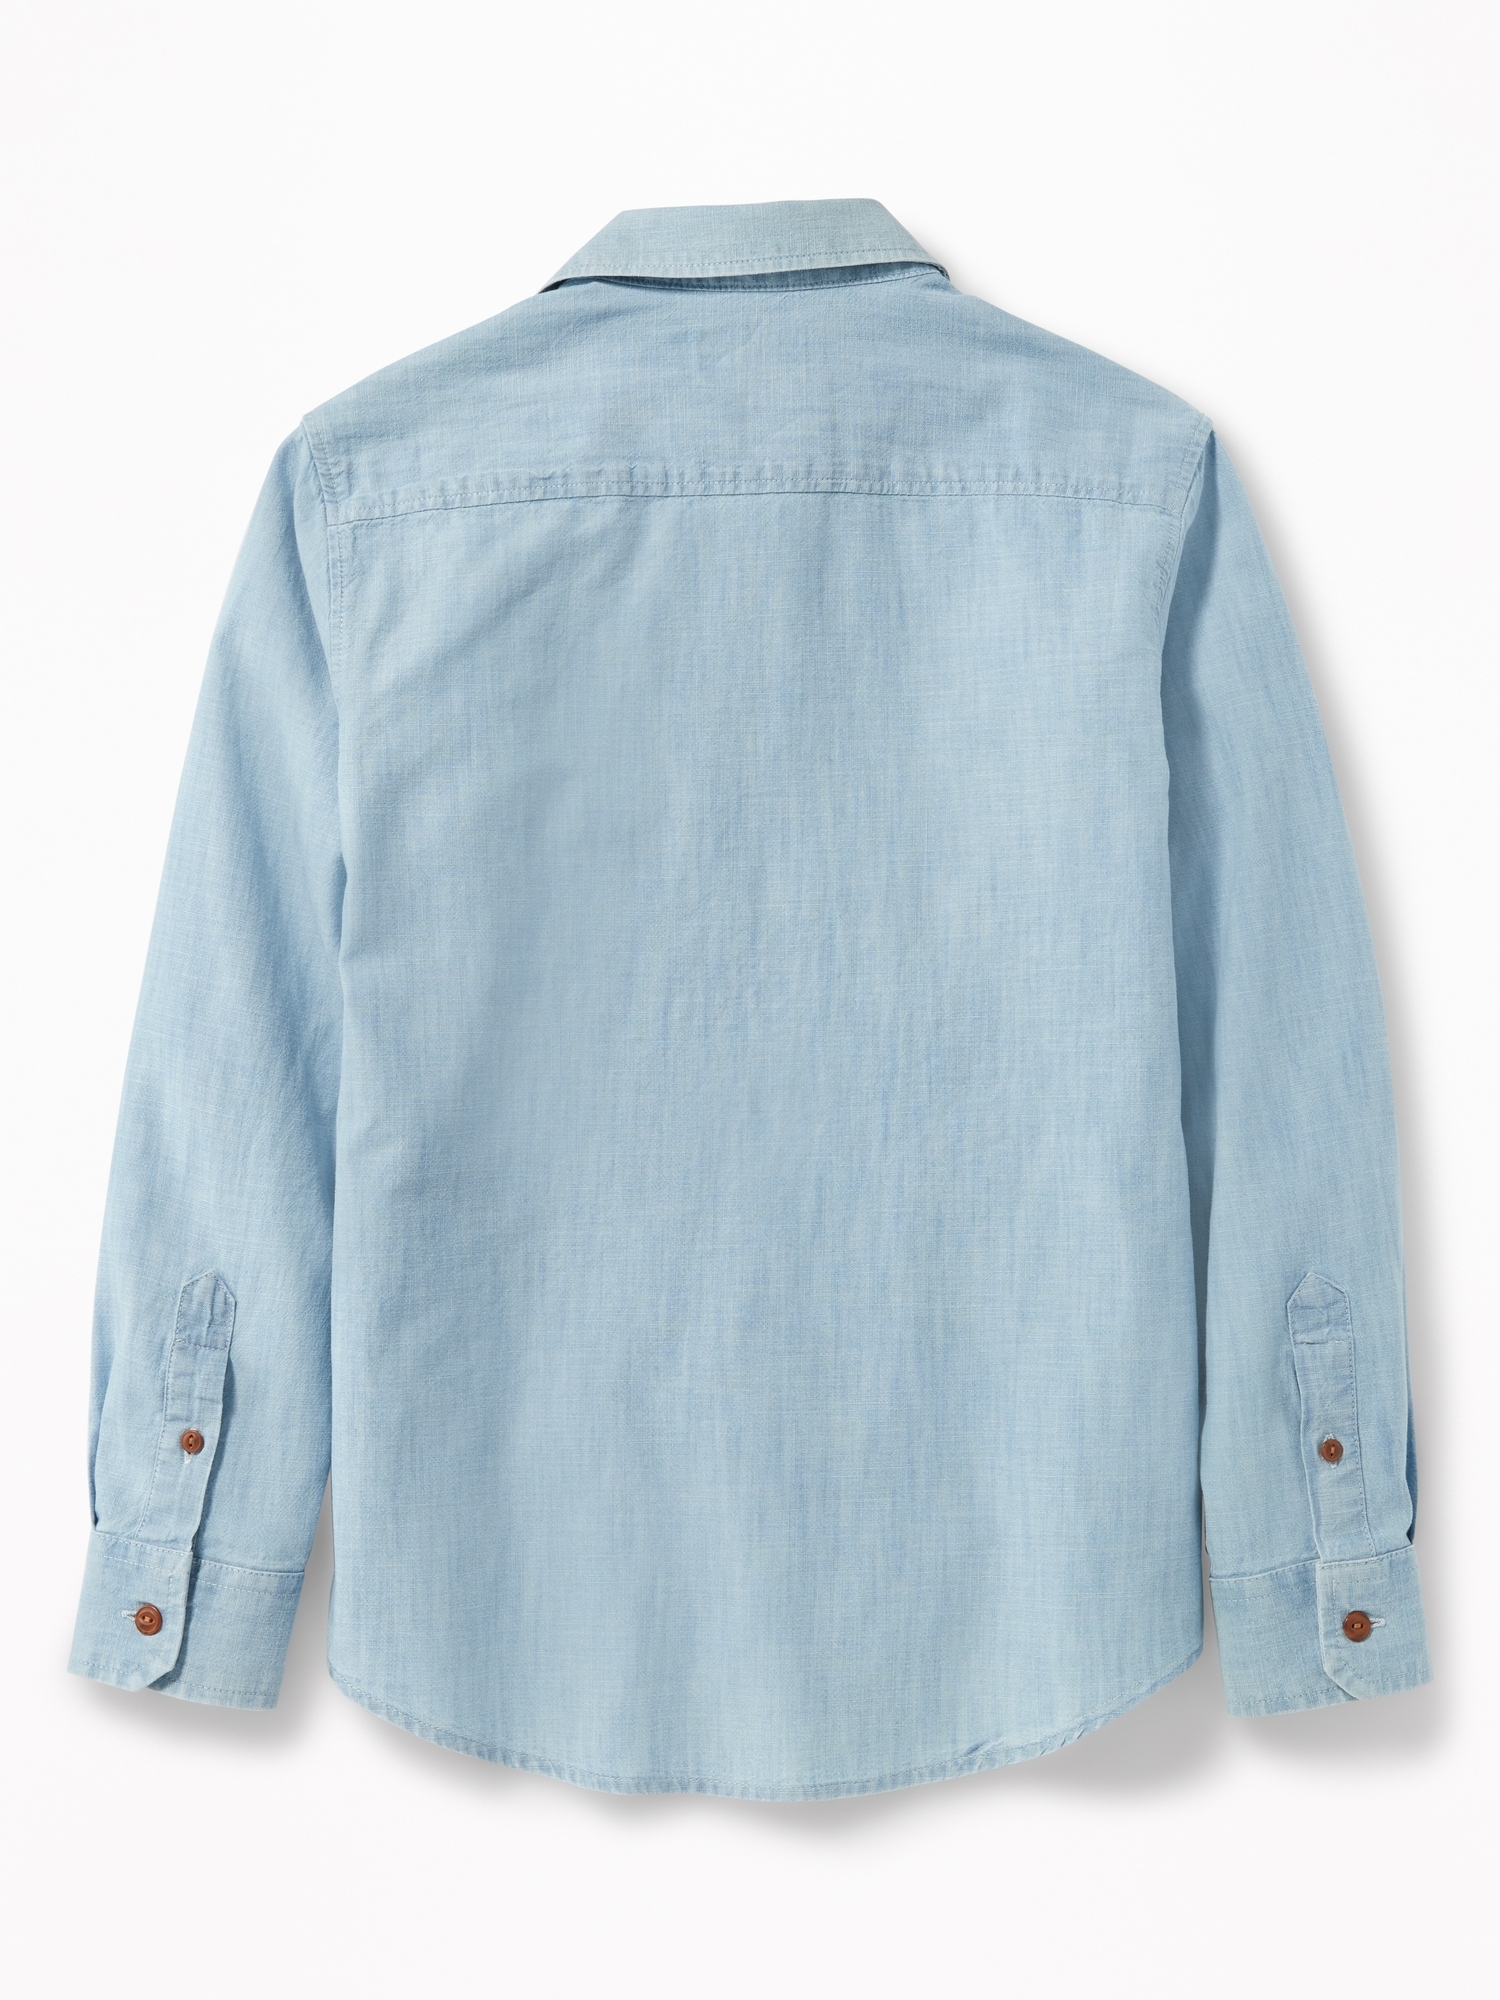 Classic Double-Pocket Shirt For Boys | Old Navy